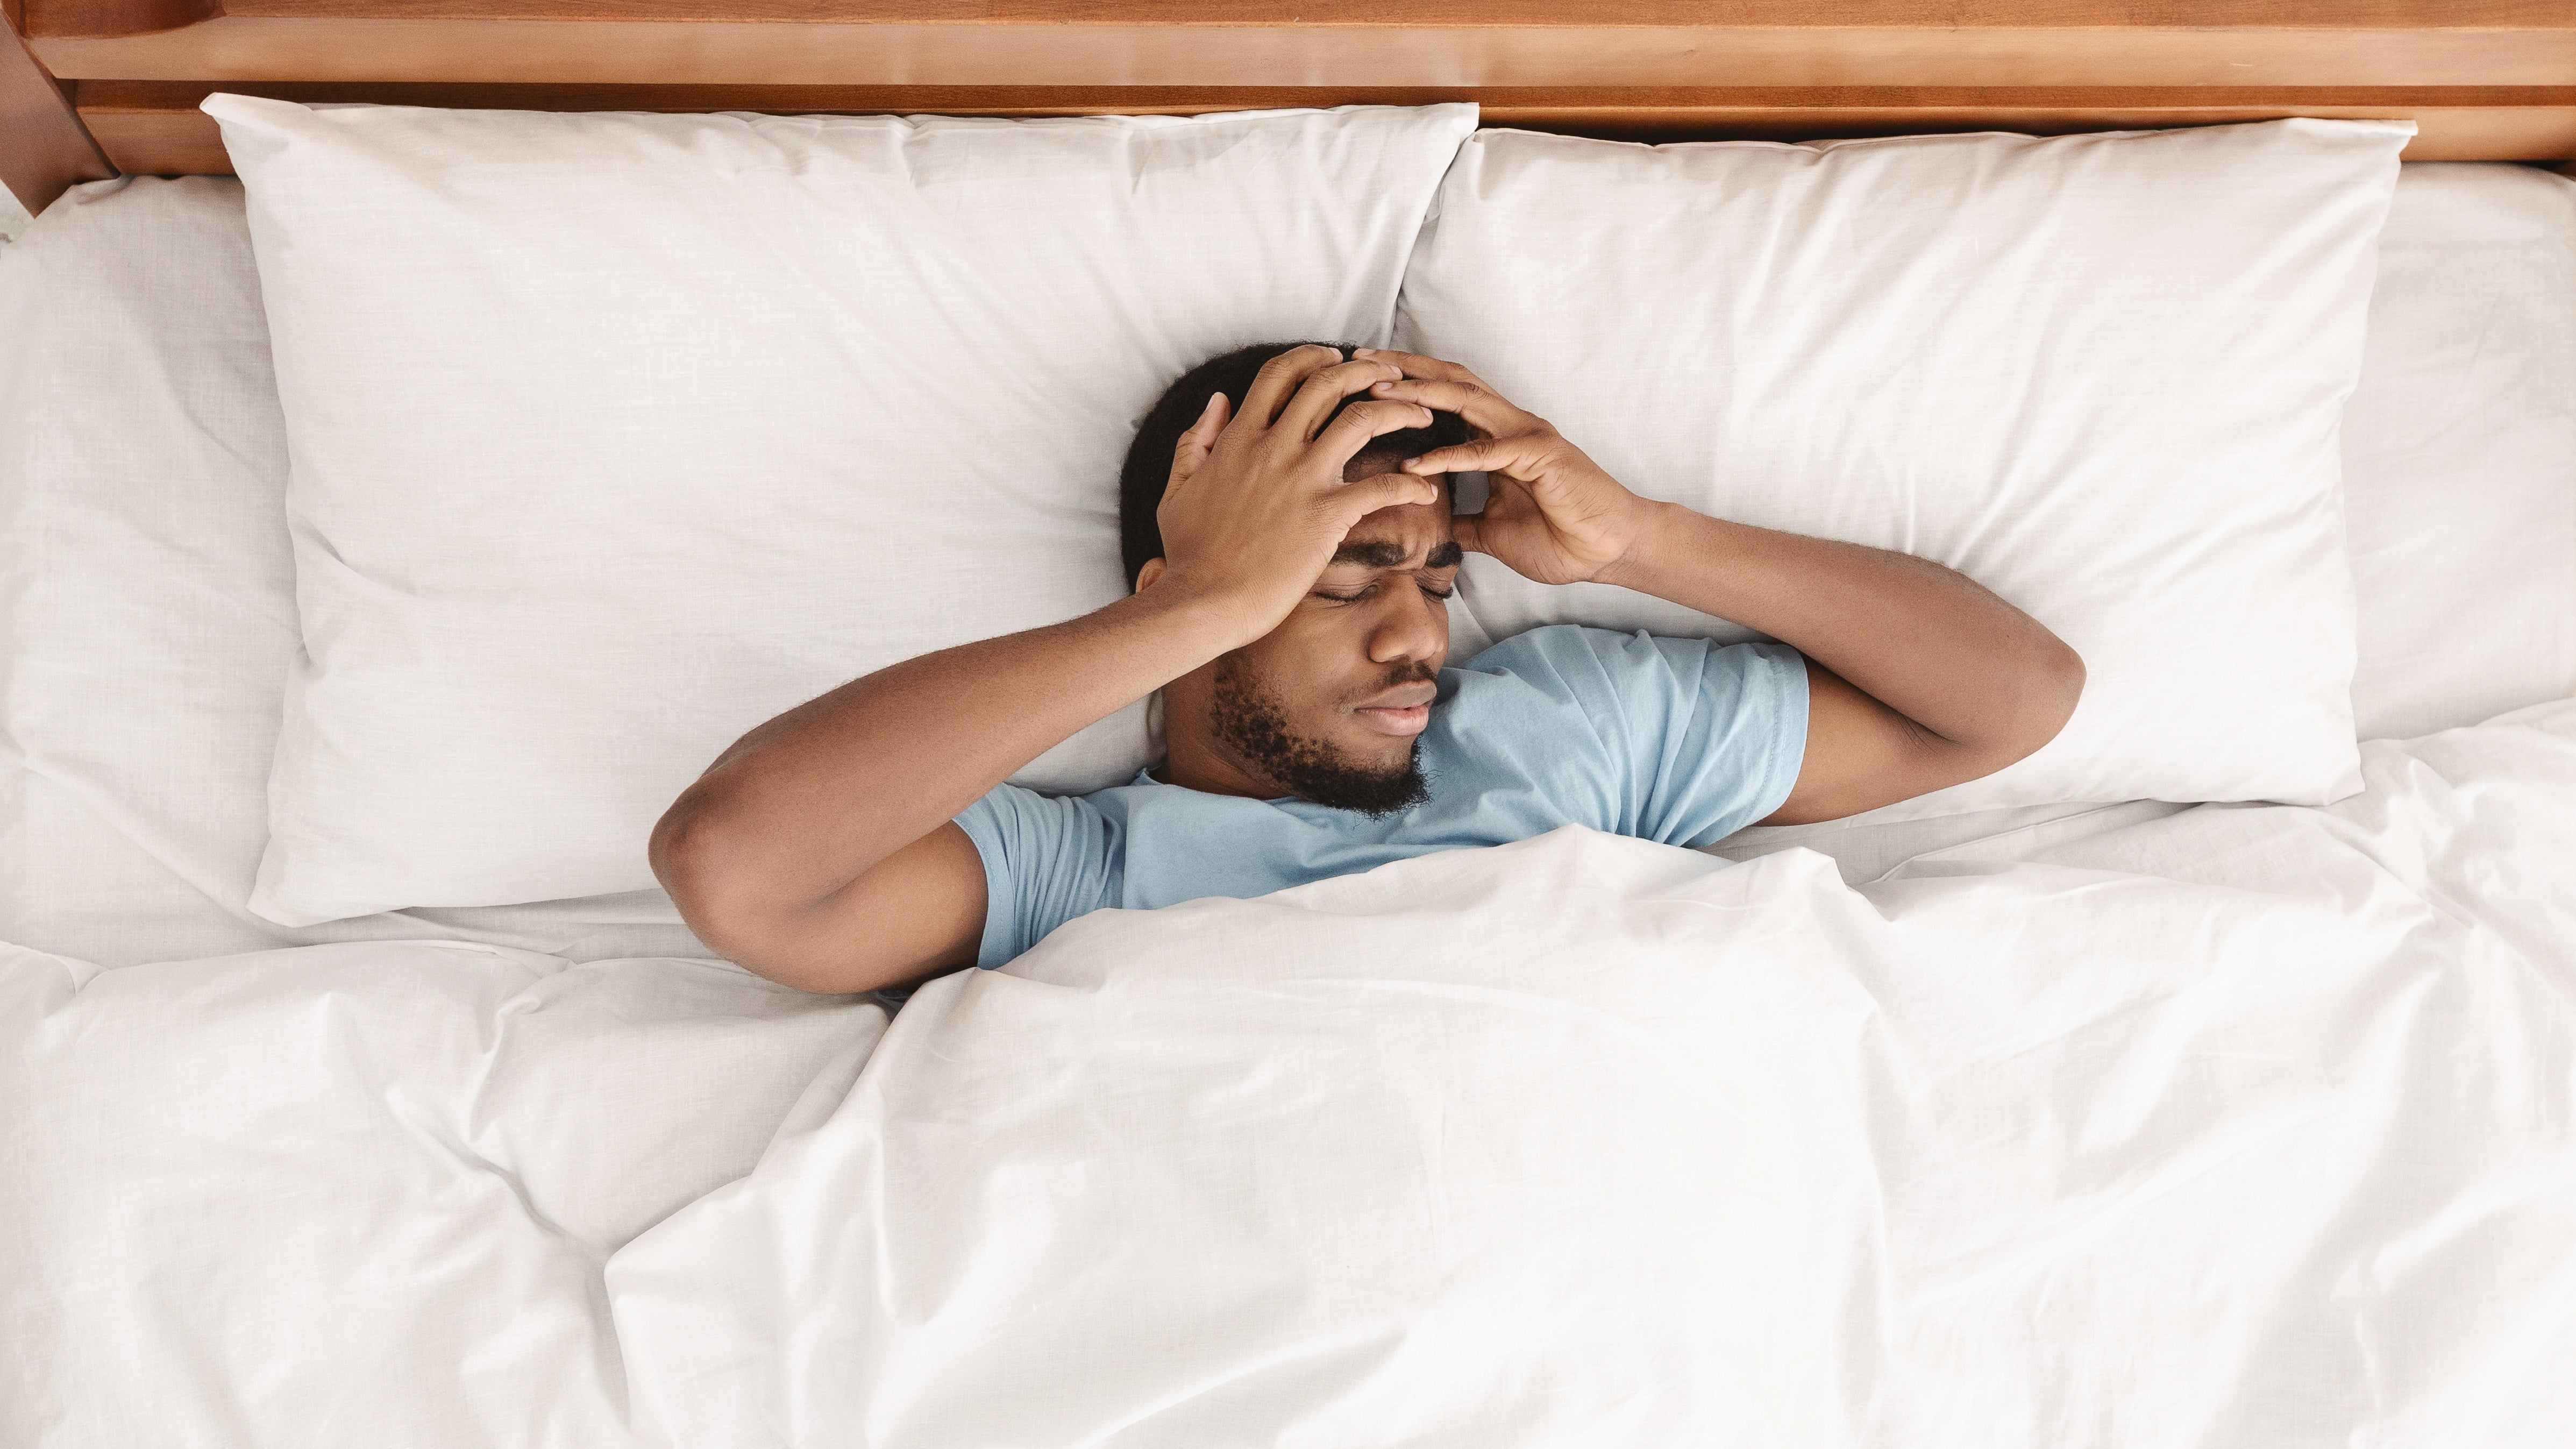 Man waking up with headache after a bad night